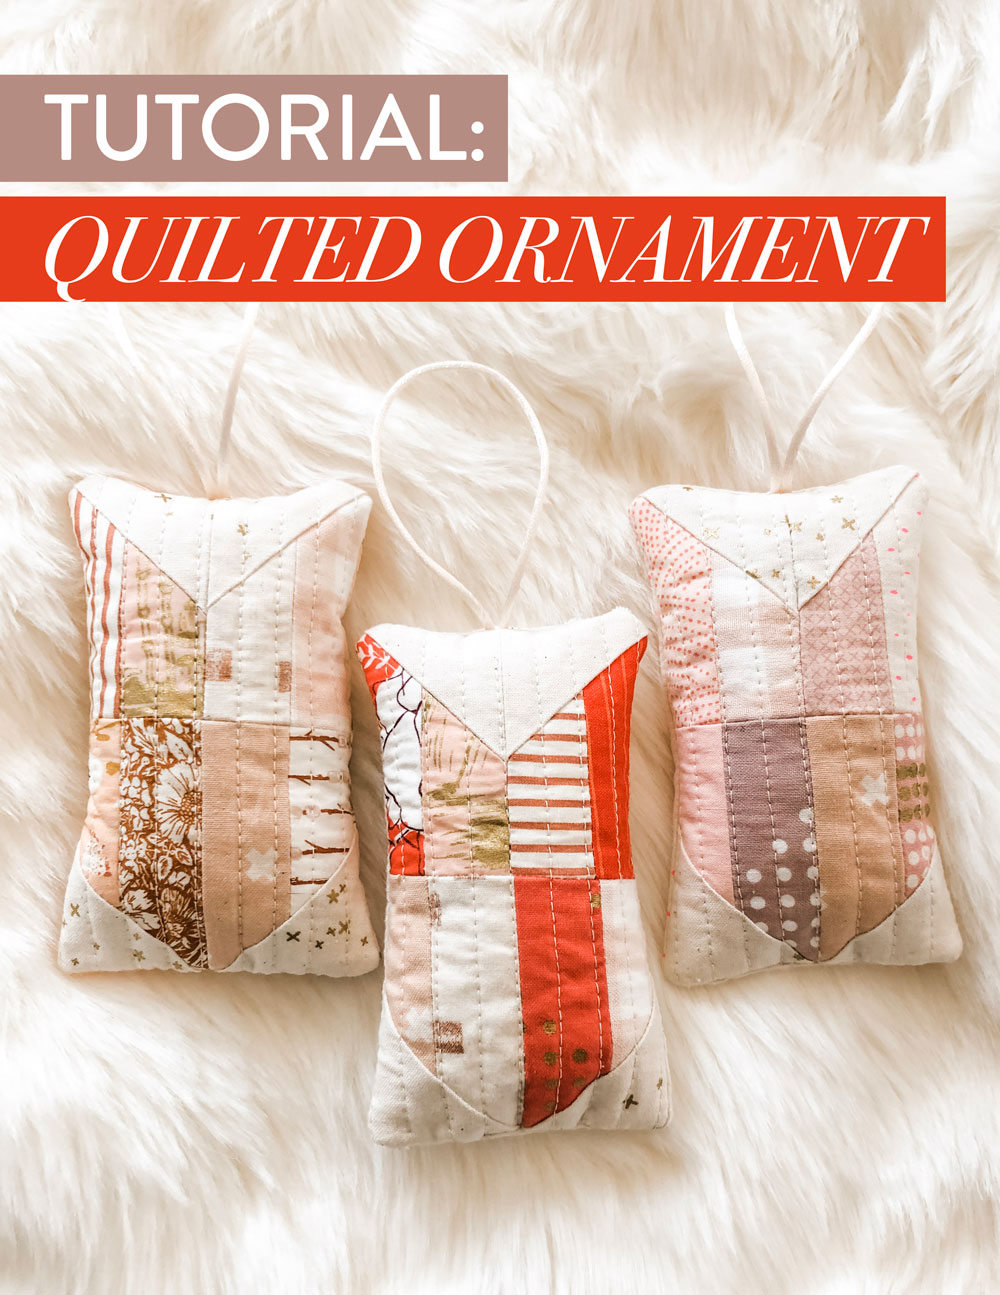 A step by step photo tutorial on how to make a modern quilted ornament. This free tutorial scales down a Tail Feather quilt block. Beginner friendly!